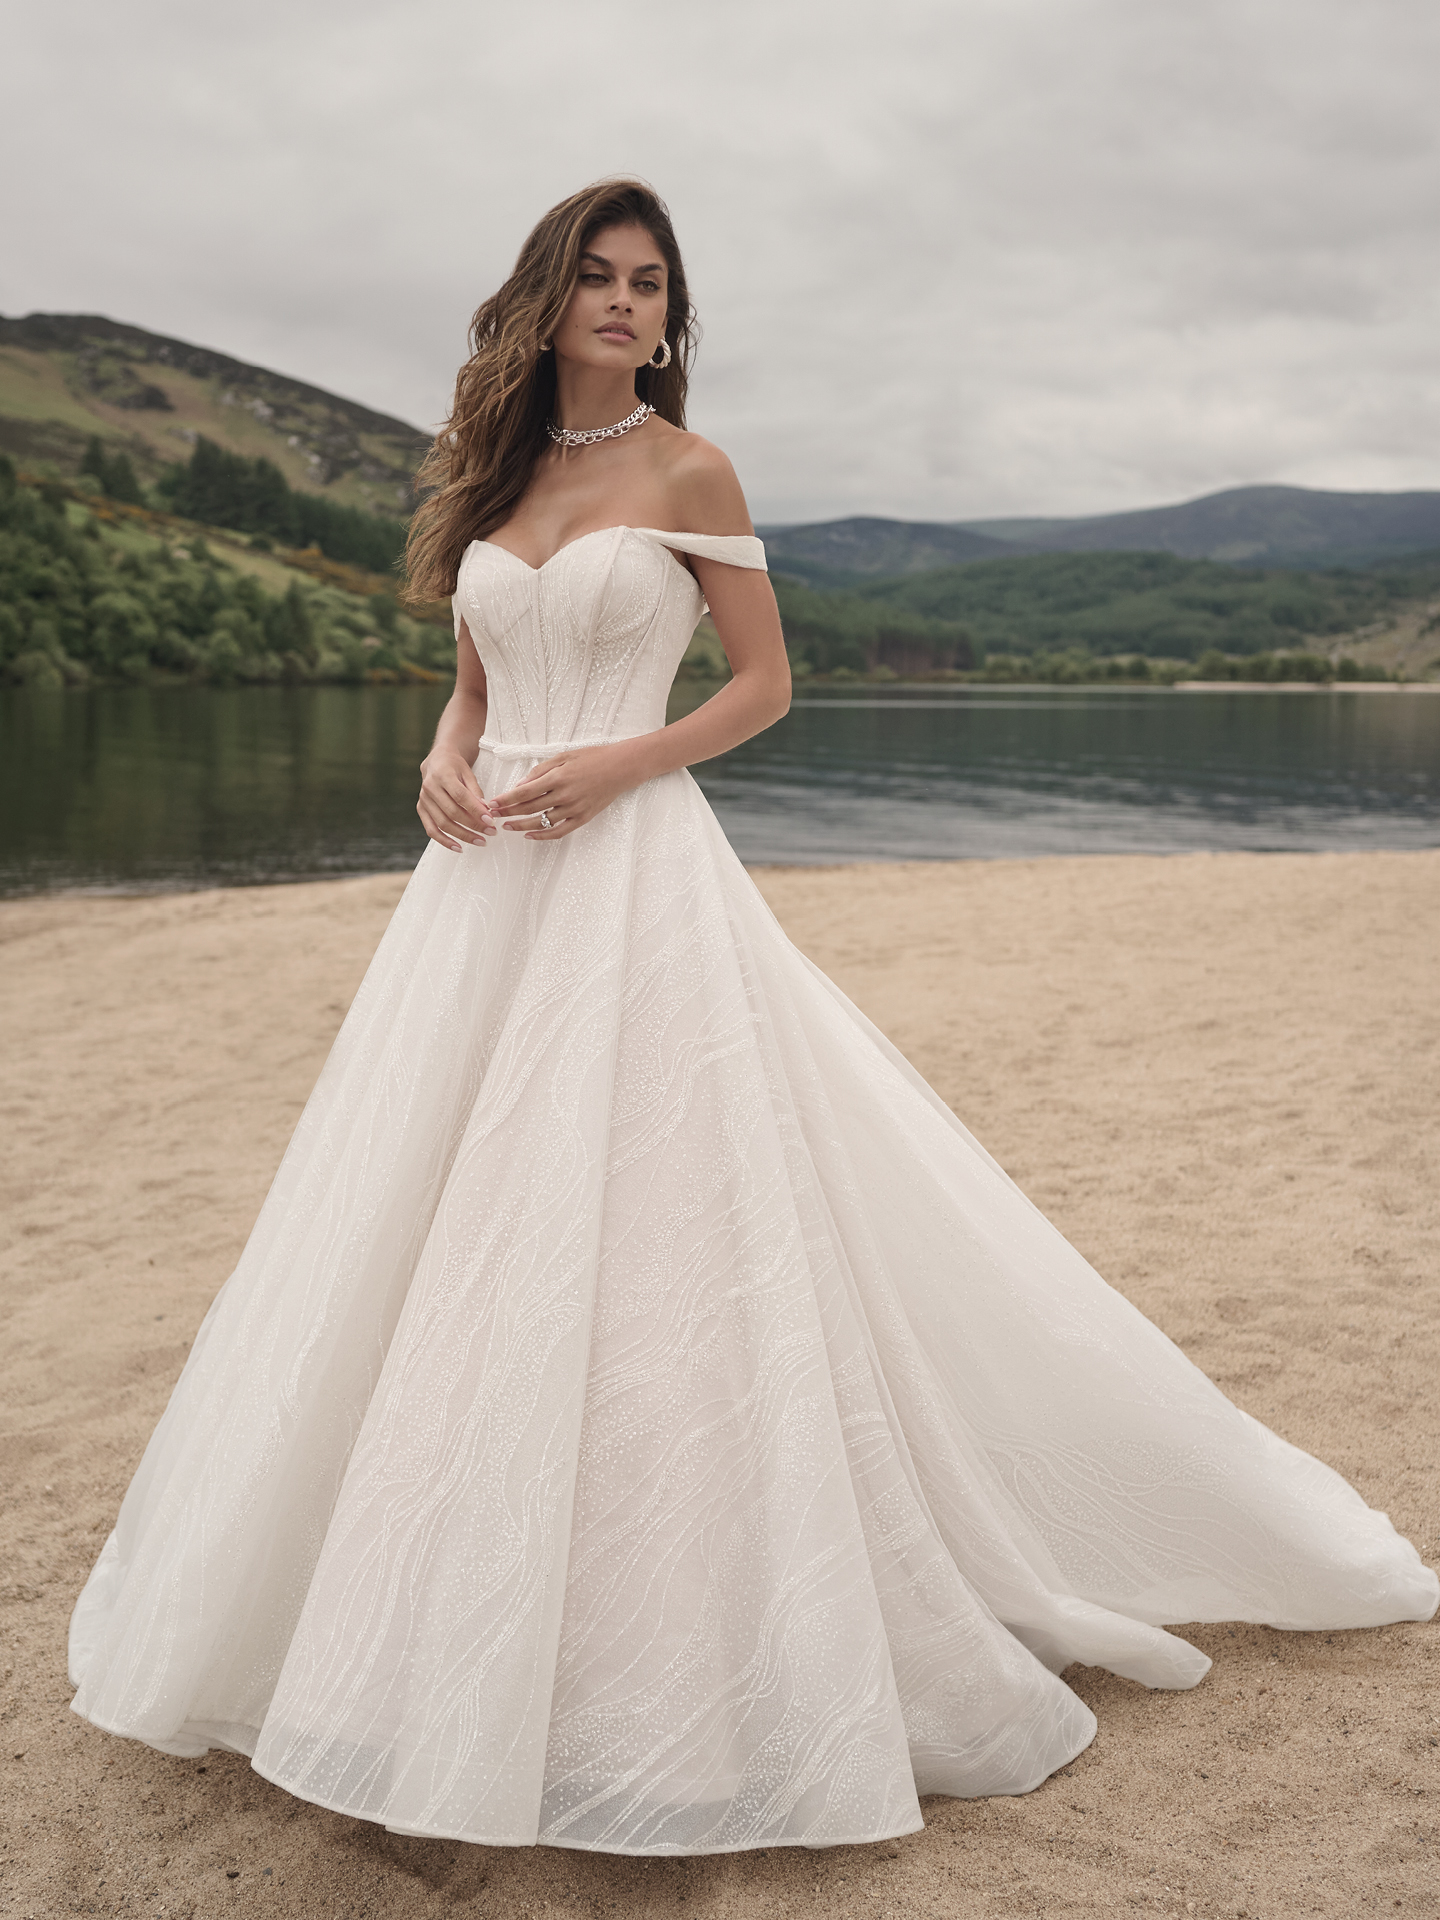 Bride In Ballgown Wedding Dress Called Chase By Sottero And Midgley With Wedding Dress Trends